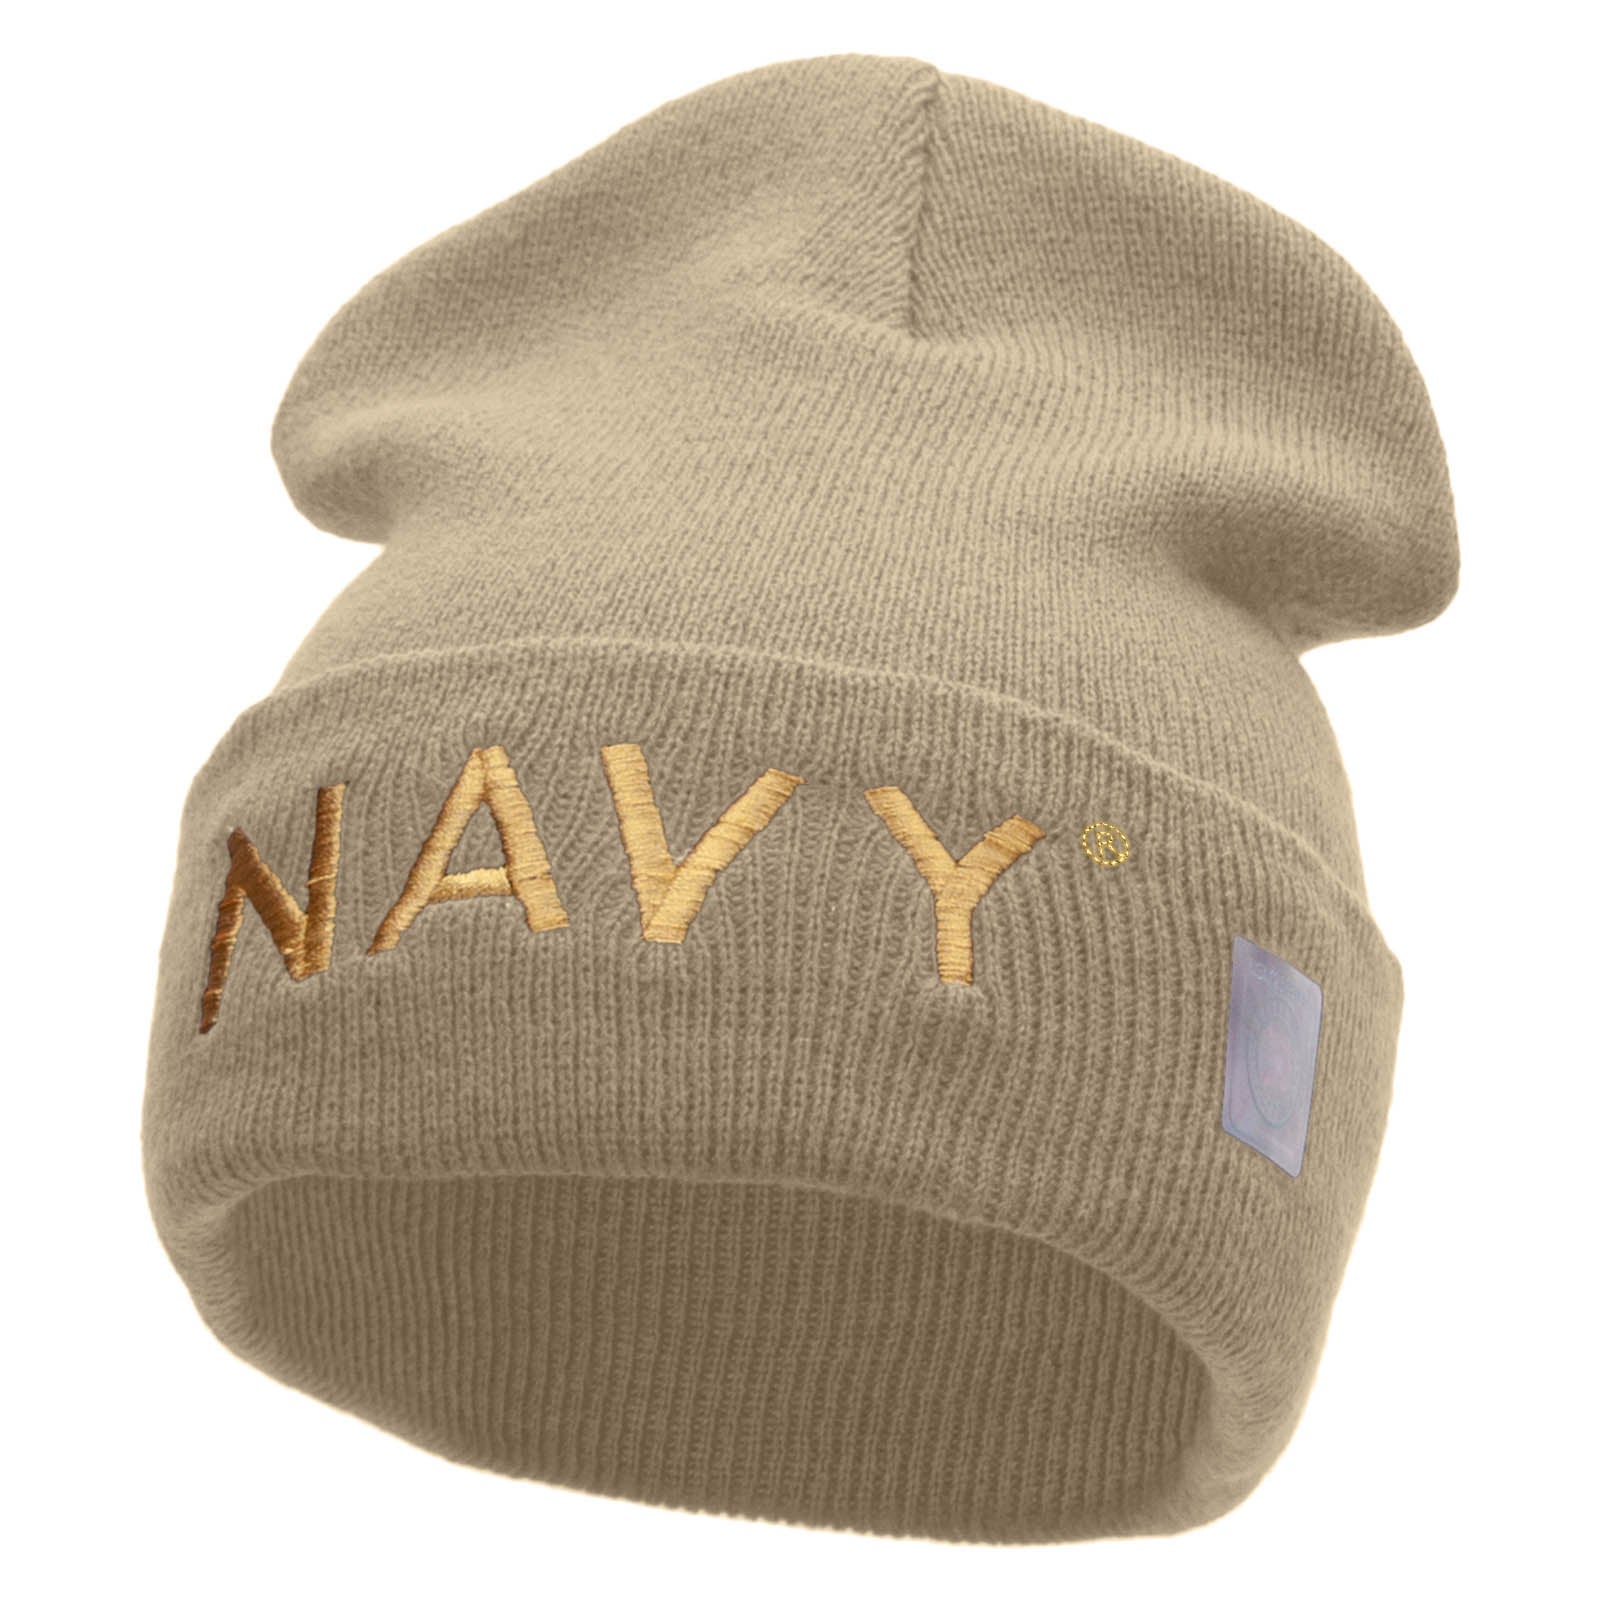 Licensed Navy Embroidered Long Knitted Beanie Made in USA - Khaki OSFM